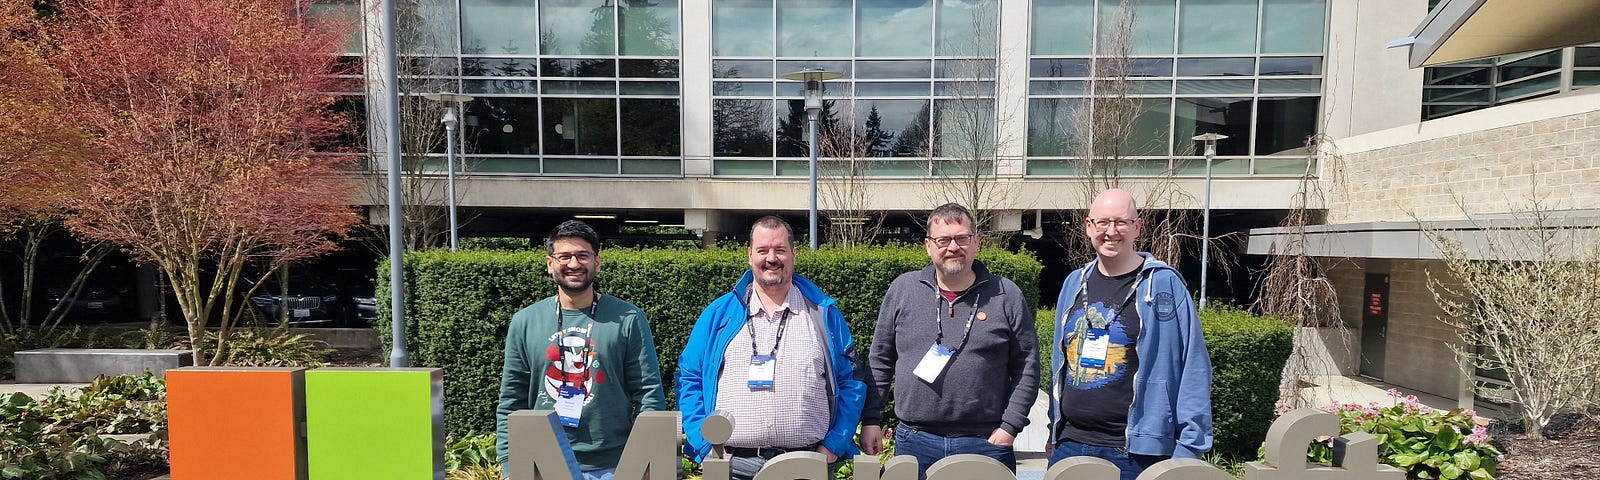 The Microsoft logo sign outside of Microsoft HQ in Seattle with Deepak Agarwal, Mike Hartley, Carl Cookson, Matt Collins-Jones all stood behind it smiling in the sunshine